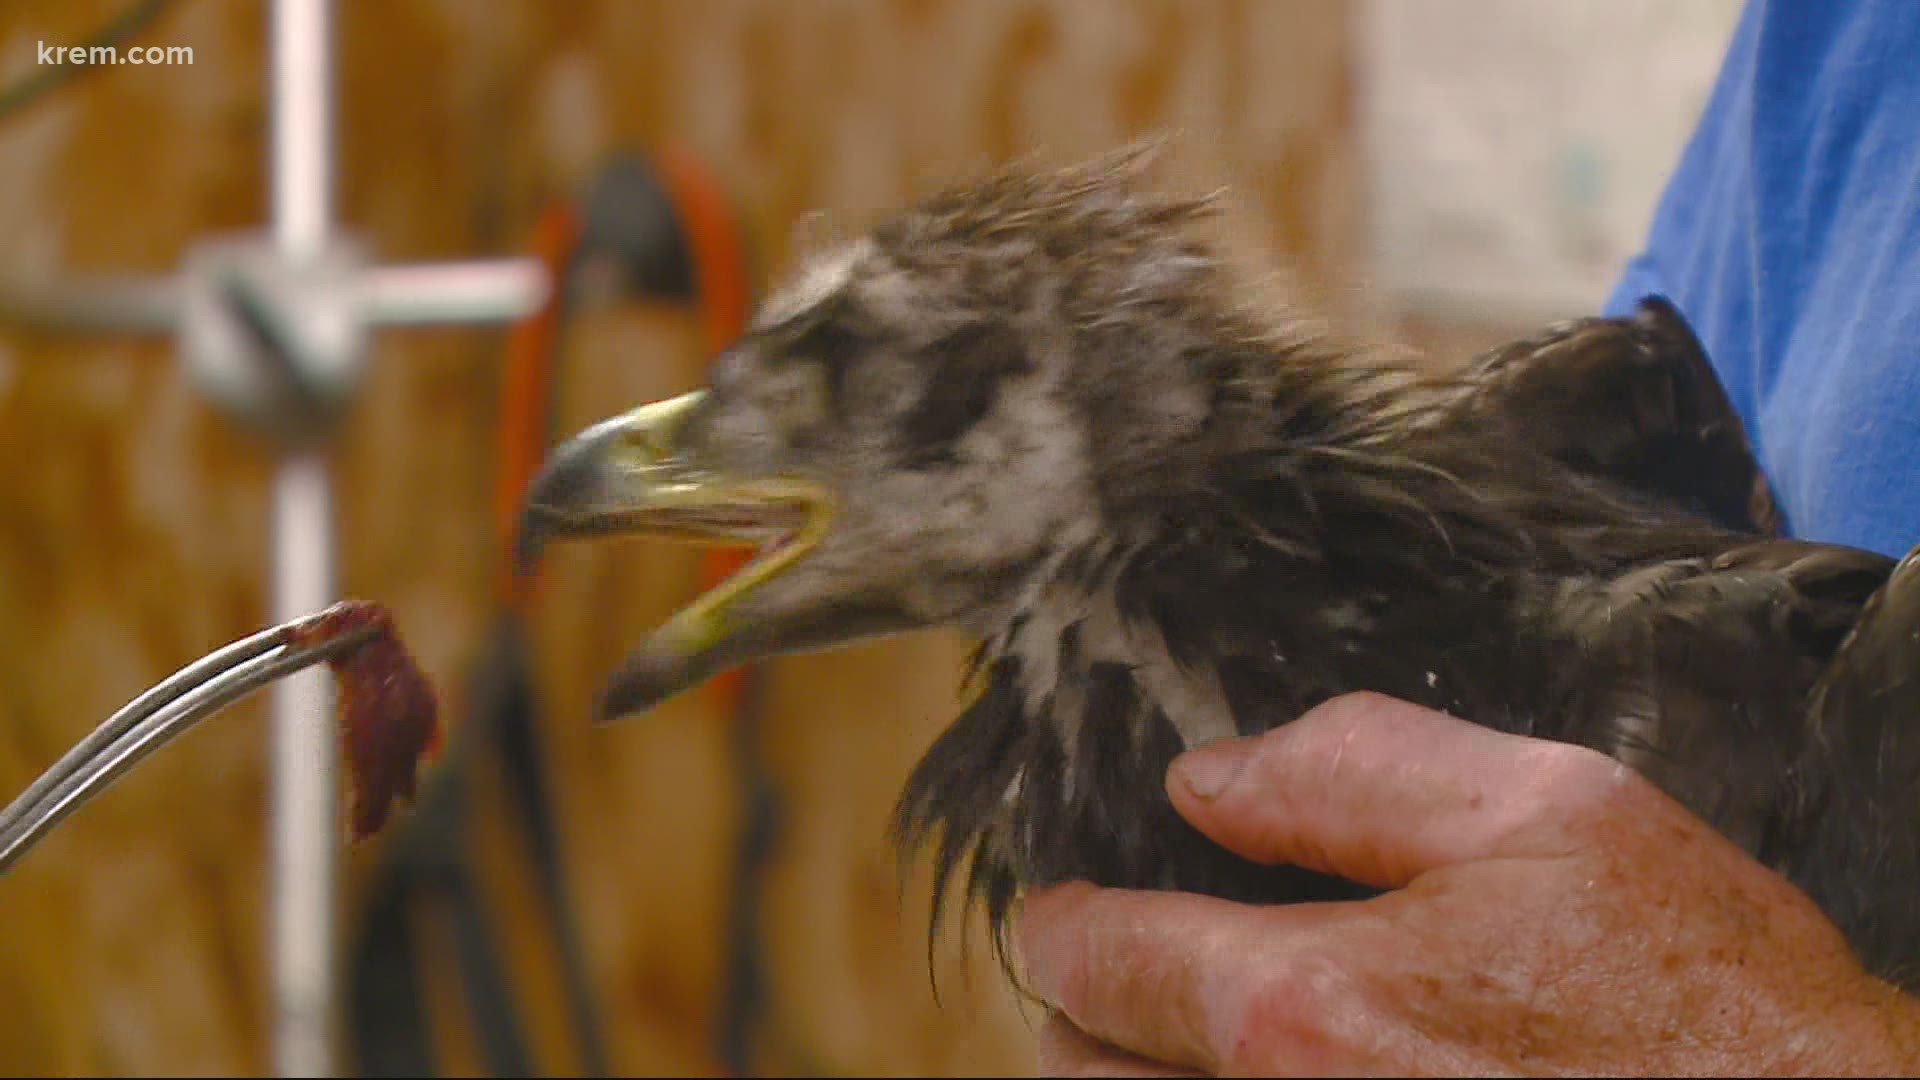 Baby bald eagle saved after near death due to heat wave 